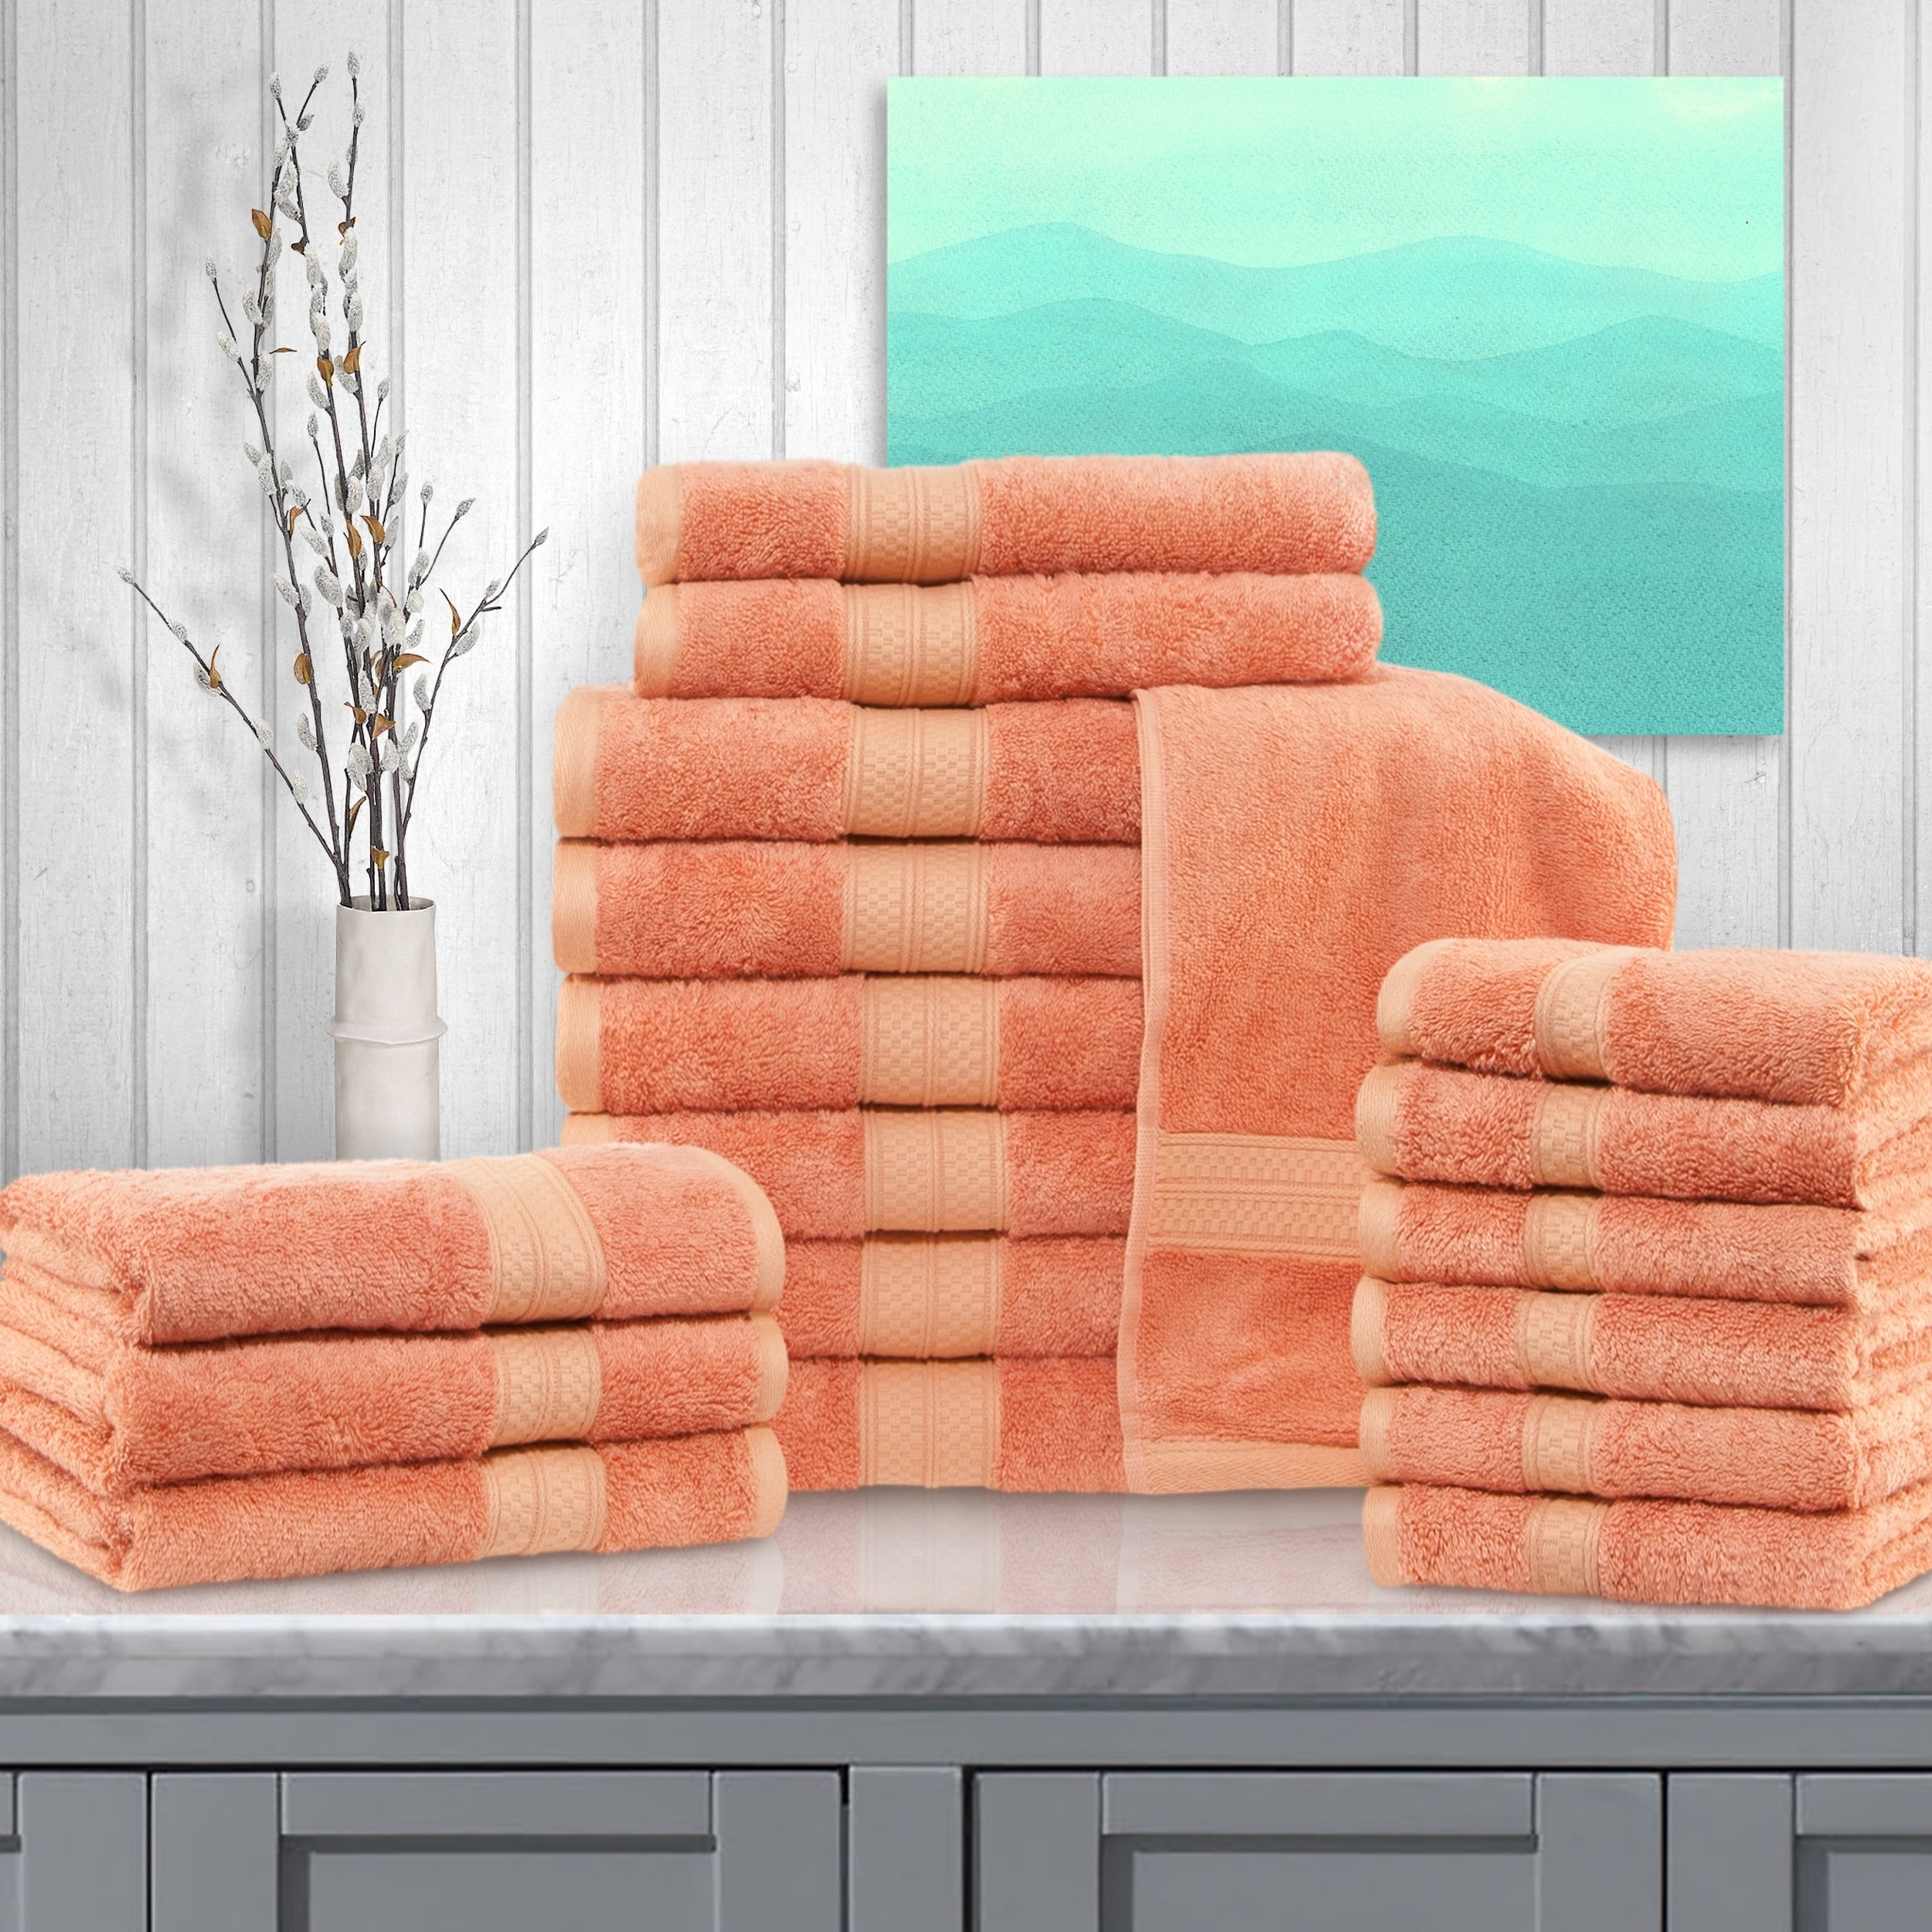 https://ak1.ostkcdn.com/images/products/15004008/Miranda-Haus-Rayon-from-Bamboo-and-Cotton-18-Piece-Bathroom-Towel-Set-N-A-c8a06c91-4a37-4da8-9b5f-a390e47c270c.jpg